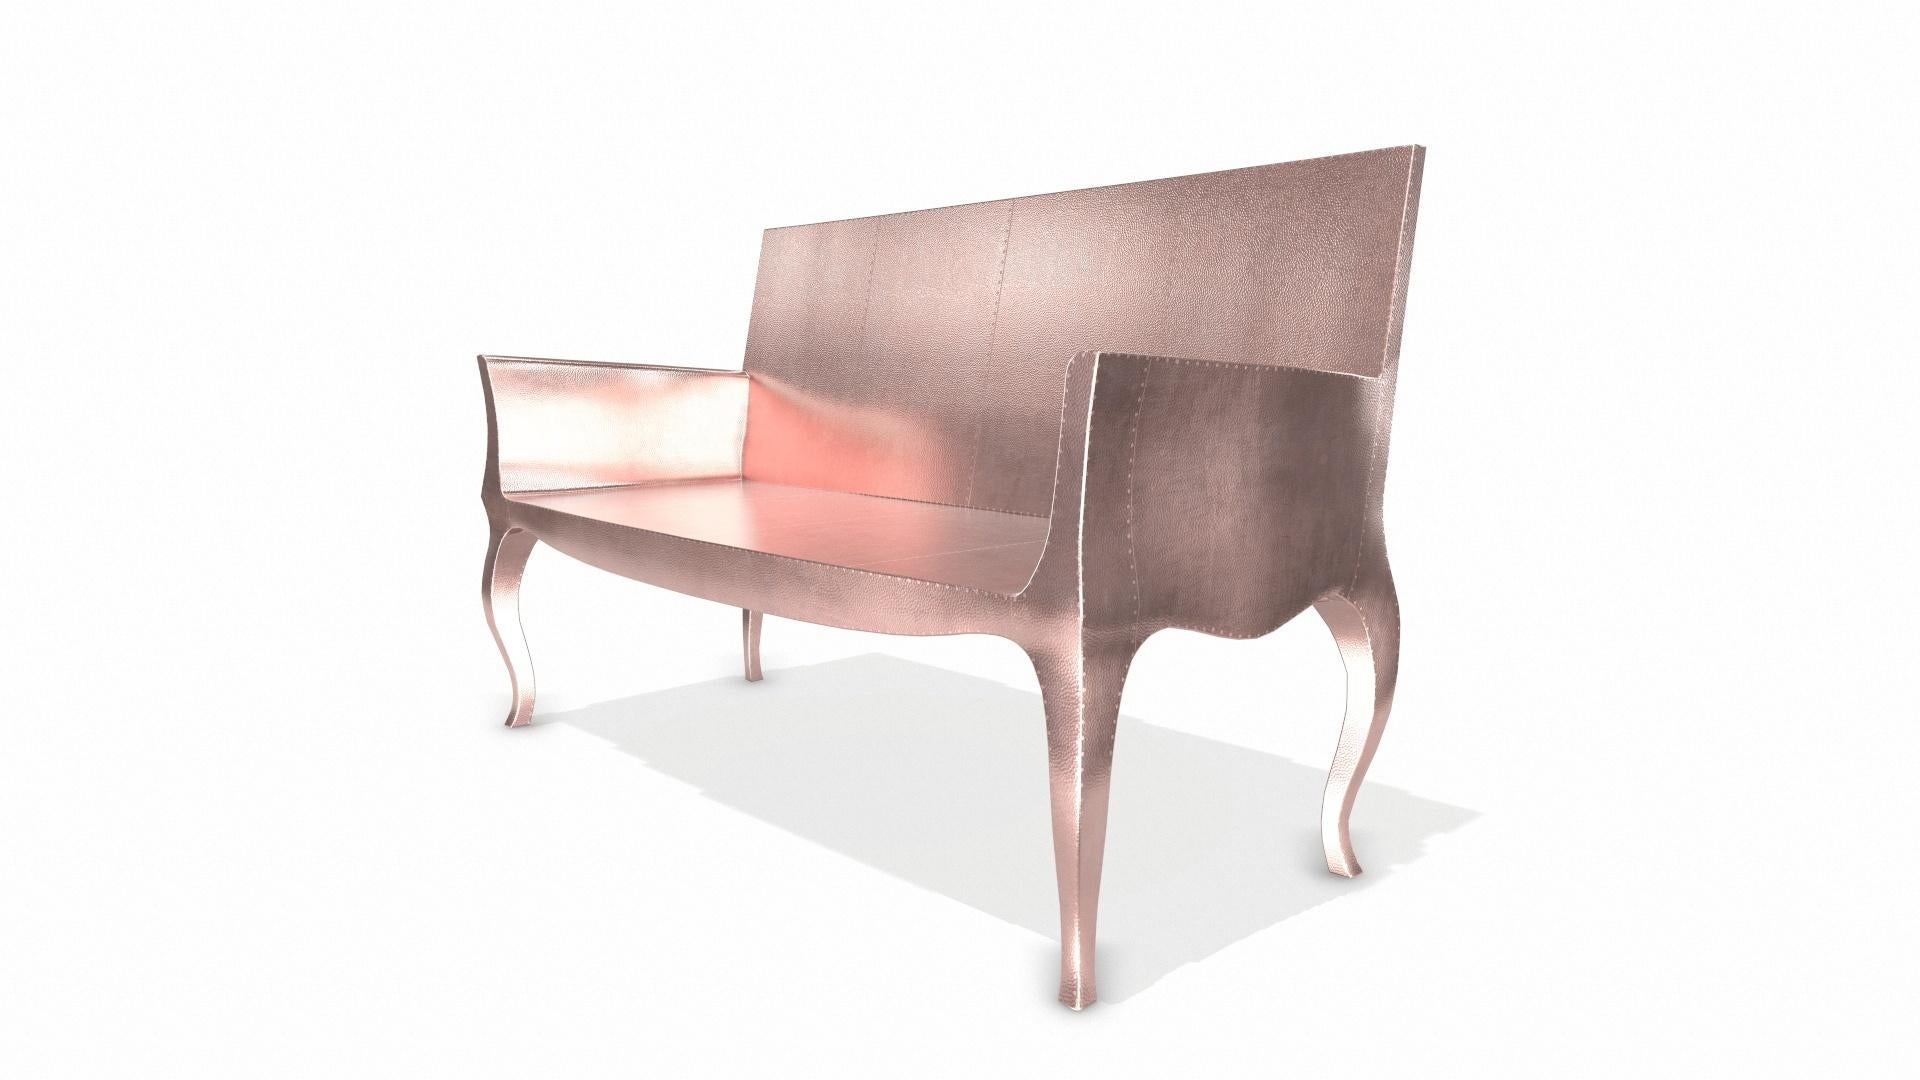 Hand-Crafted Louise Settee Art Deco Lounge Chairs in Mid. Hammered Copper by Paul Mathieu For Sale